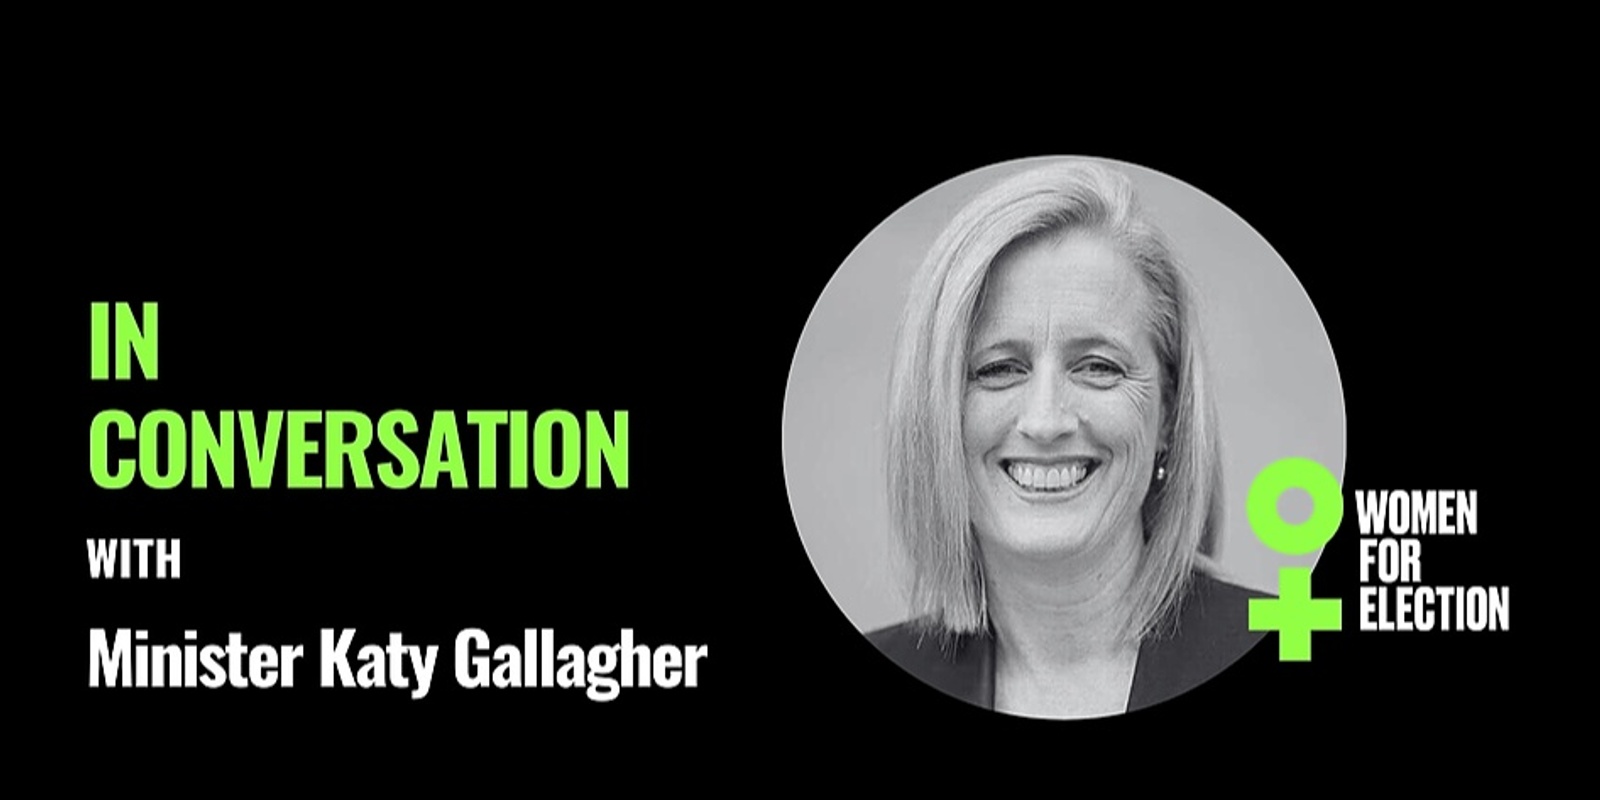 In Conversation with Minister for Women, Katy Gallagher